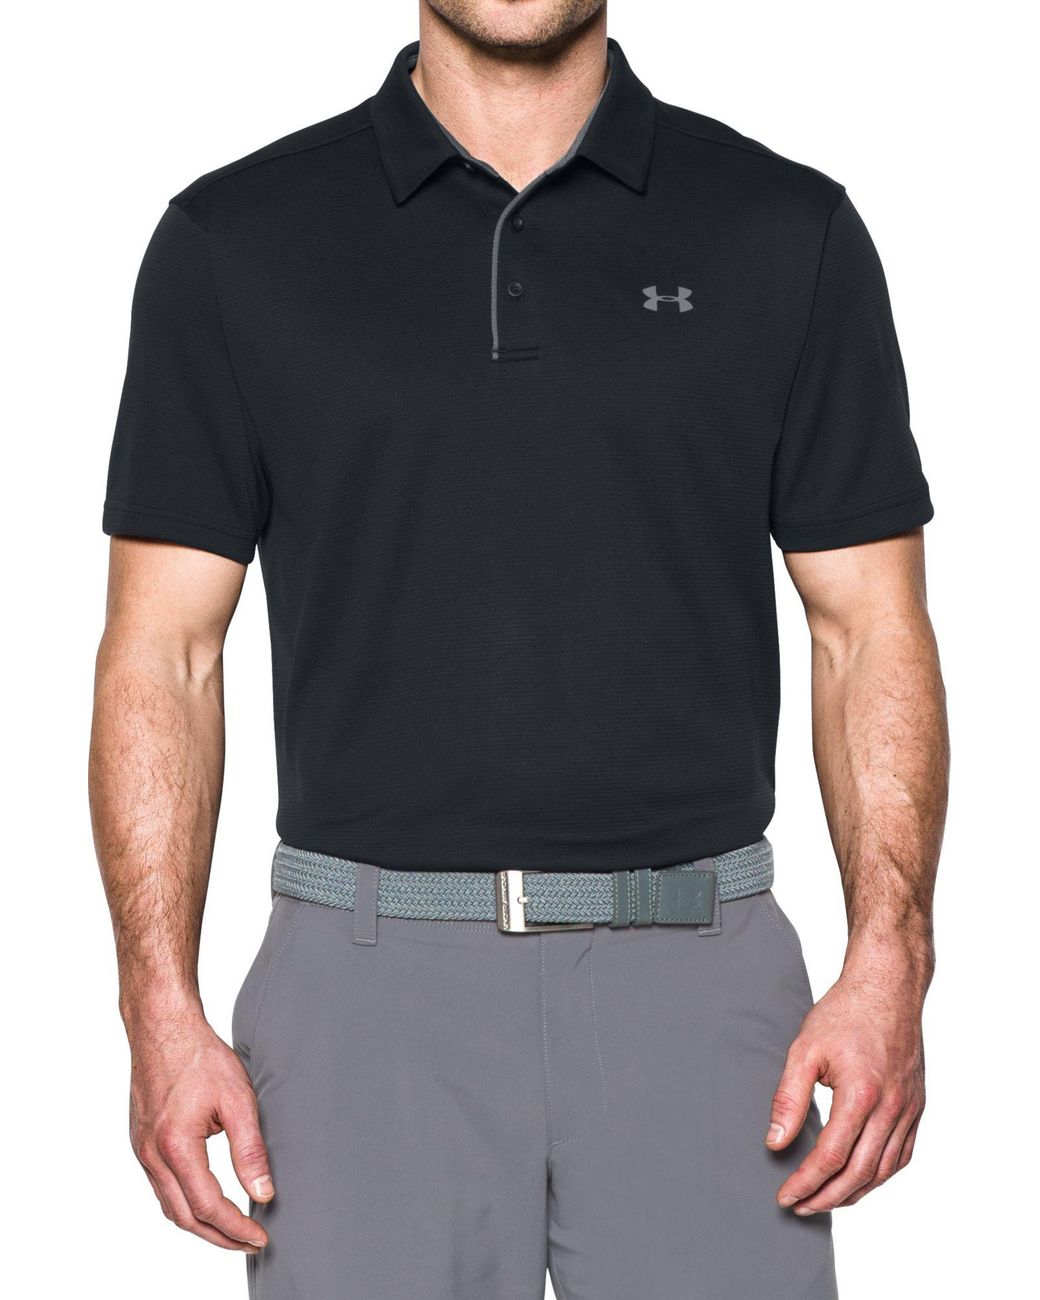 Under Armour Synthetic Tech Golf Polo in Black for Men - Lyst